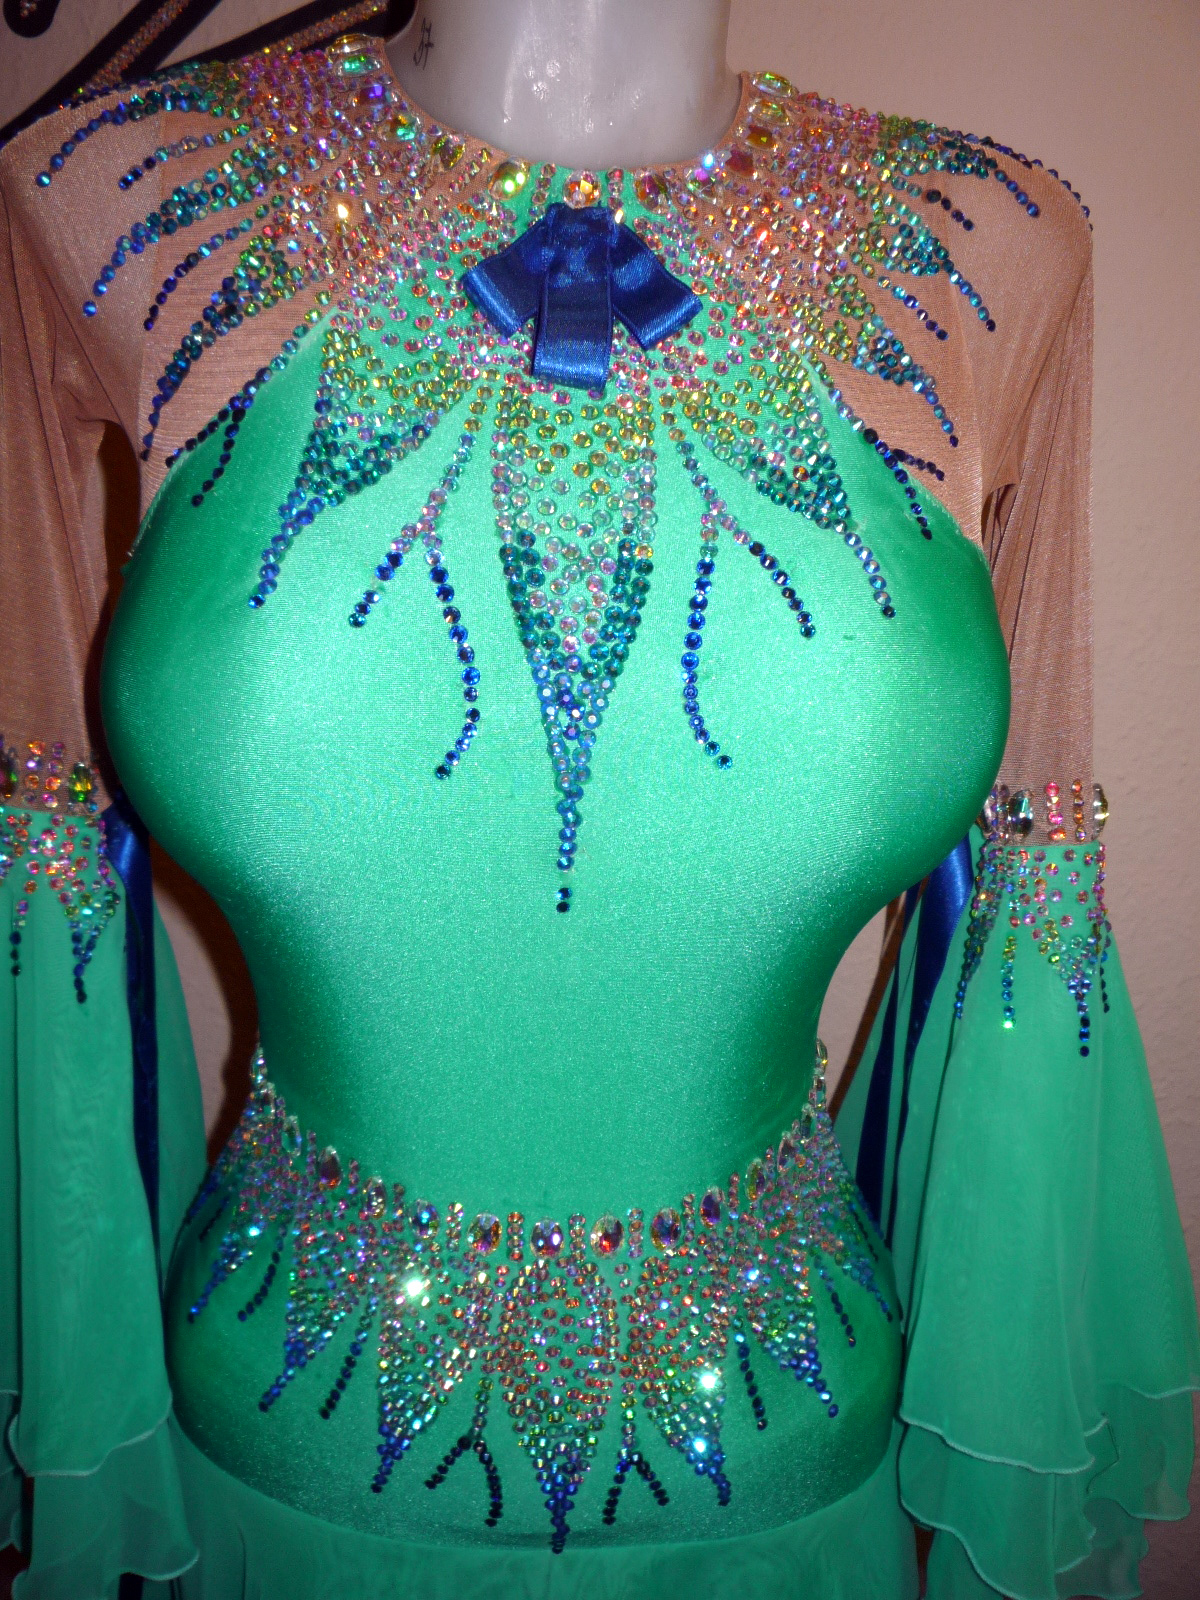 T115 Cool Aqua Standard Dance Costume for sale - Dreamgown